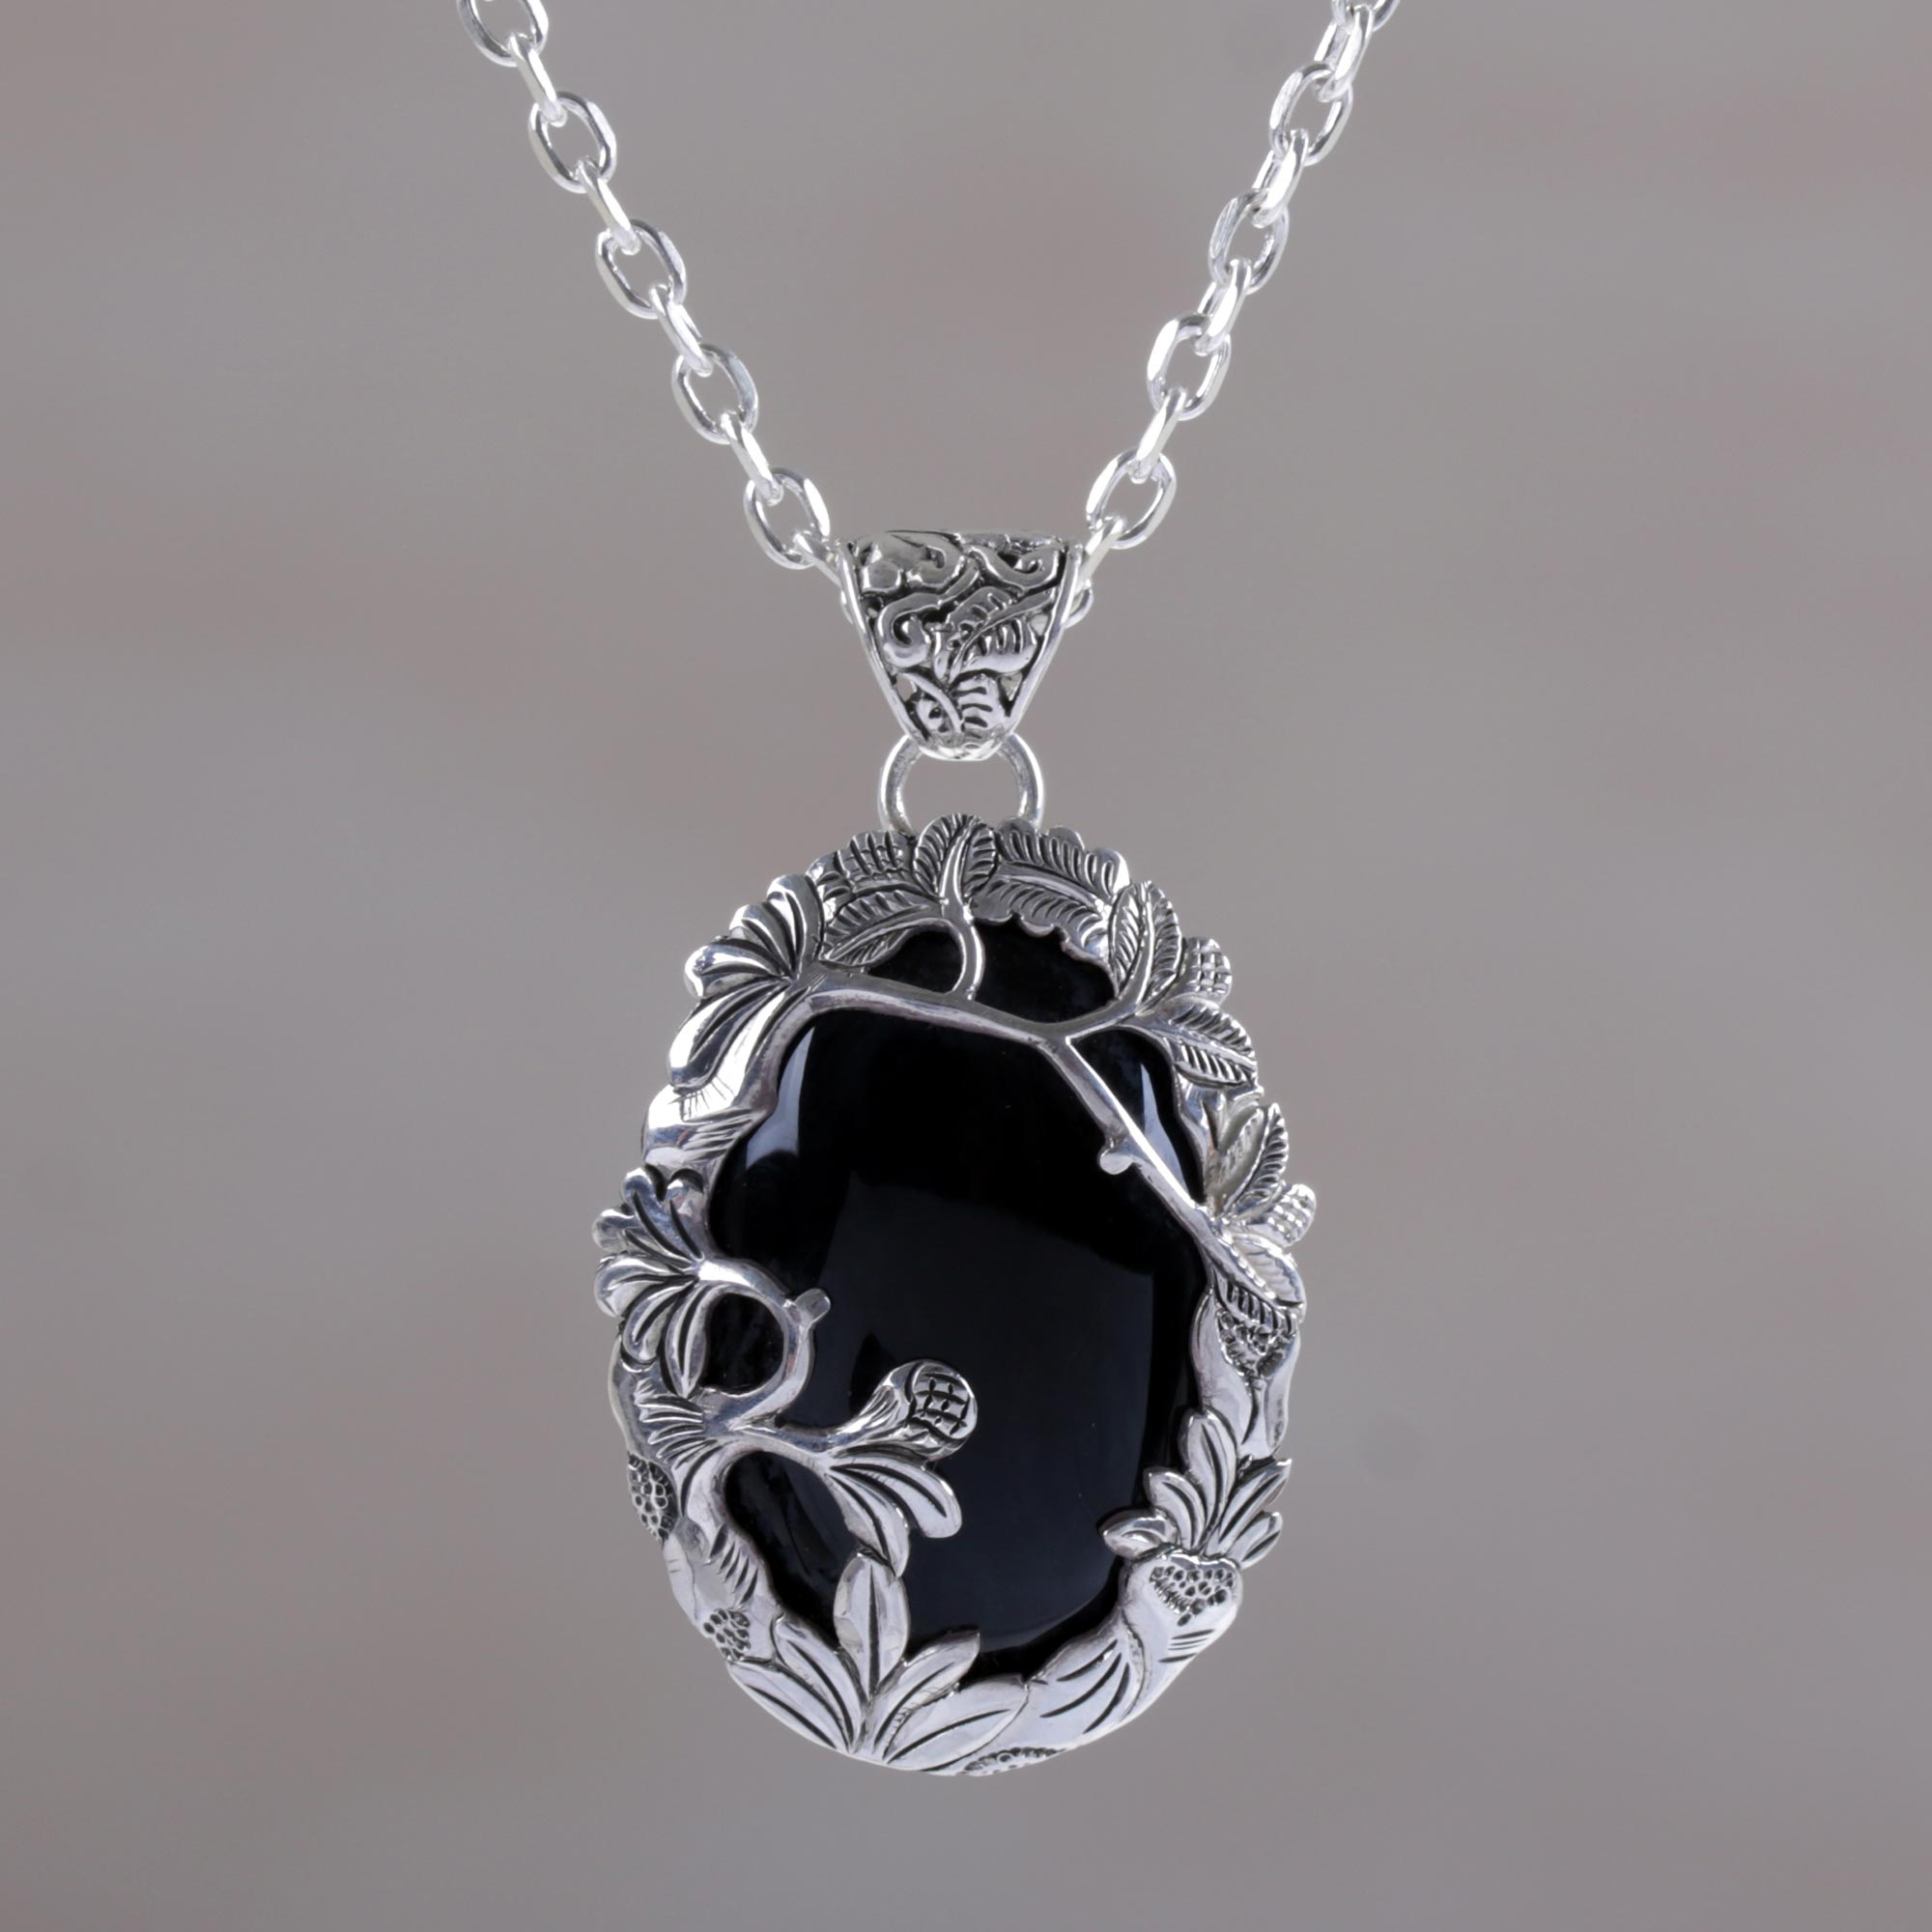 Latest Design Black Onyx Sterling Silver Overlay Necklace 17-18 Handmade Jewelry